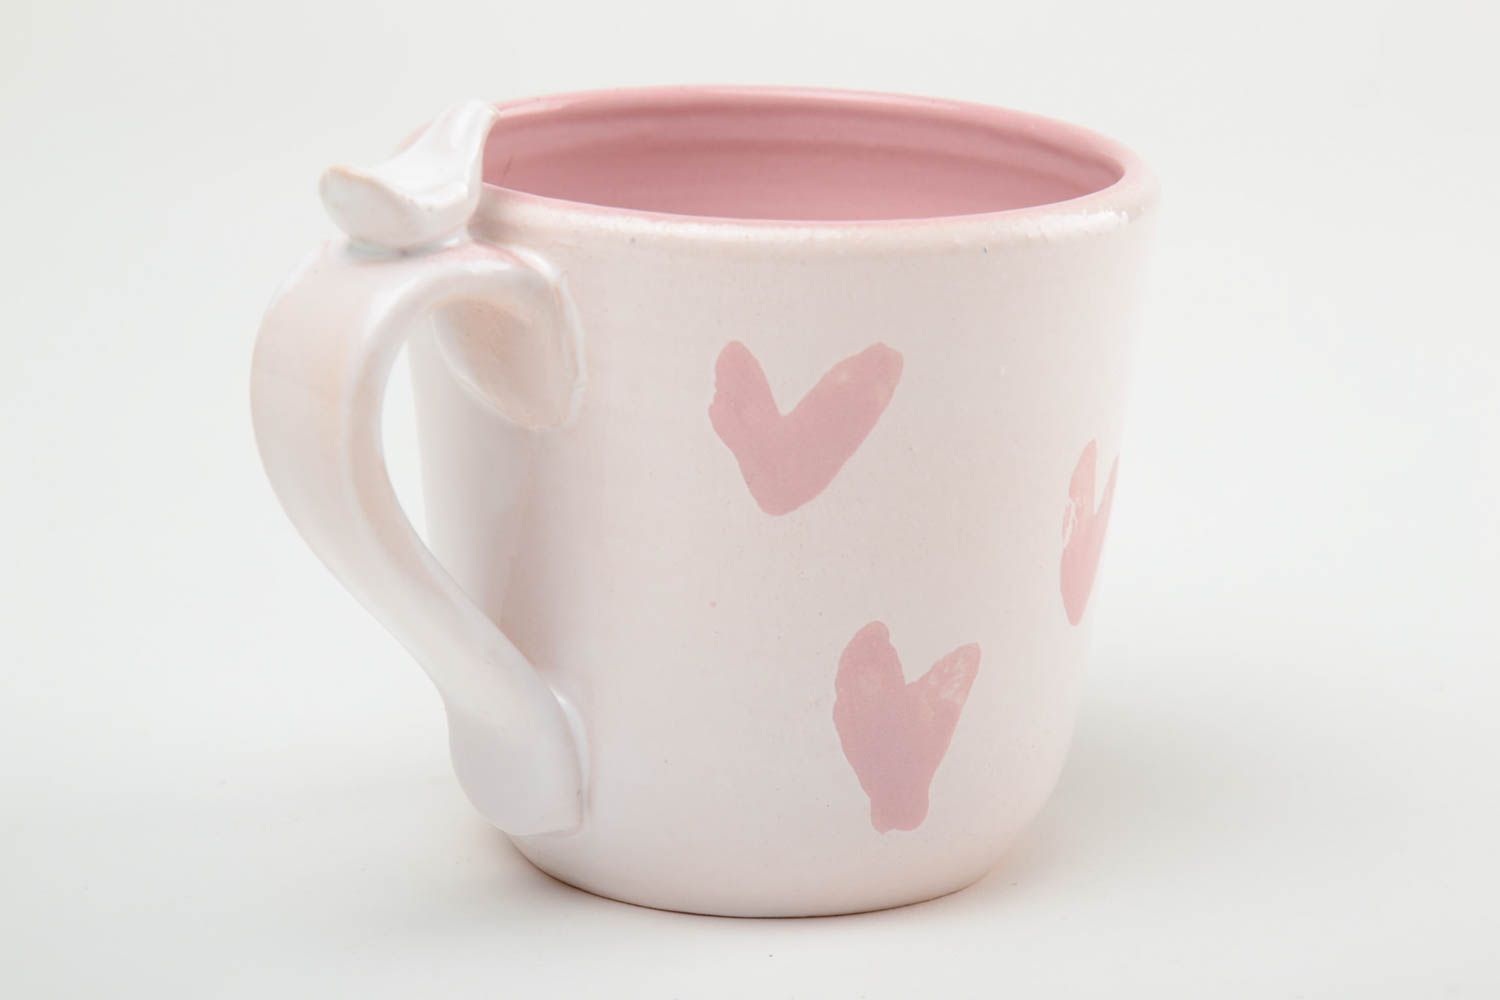 10 oz pink glaze ceramic cup with hearts pattern and bird on the handle photo 4